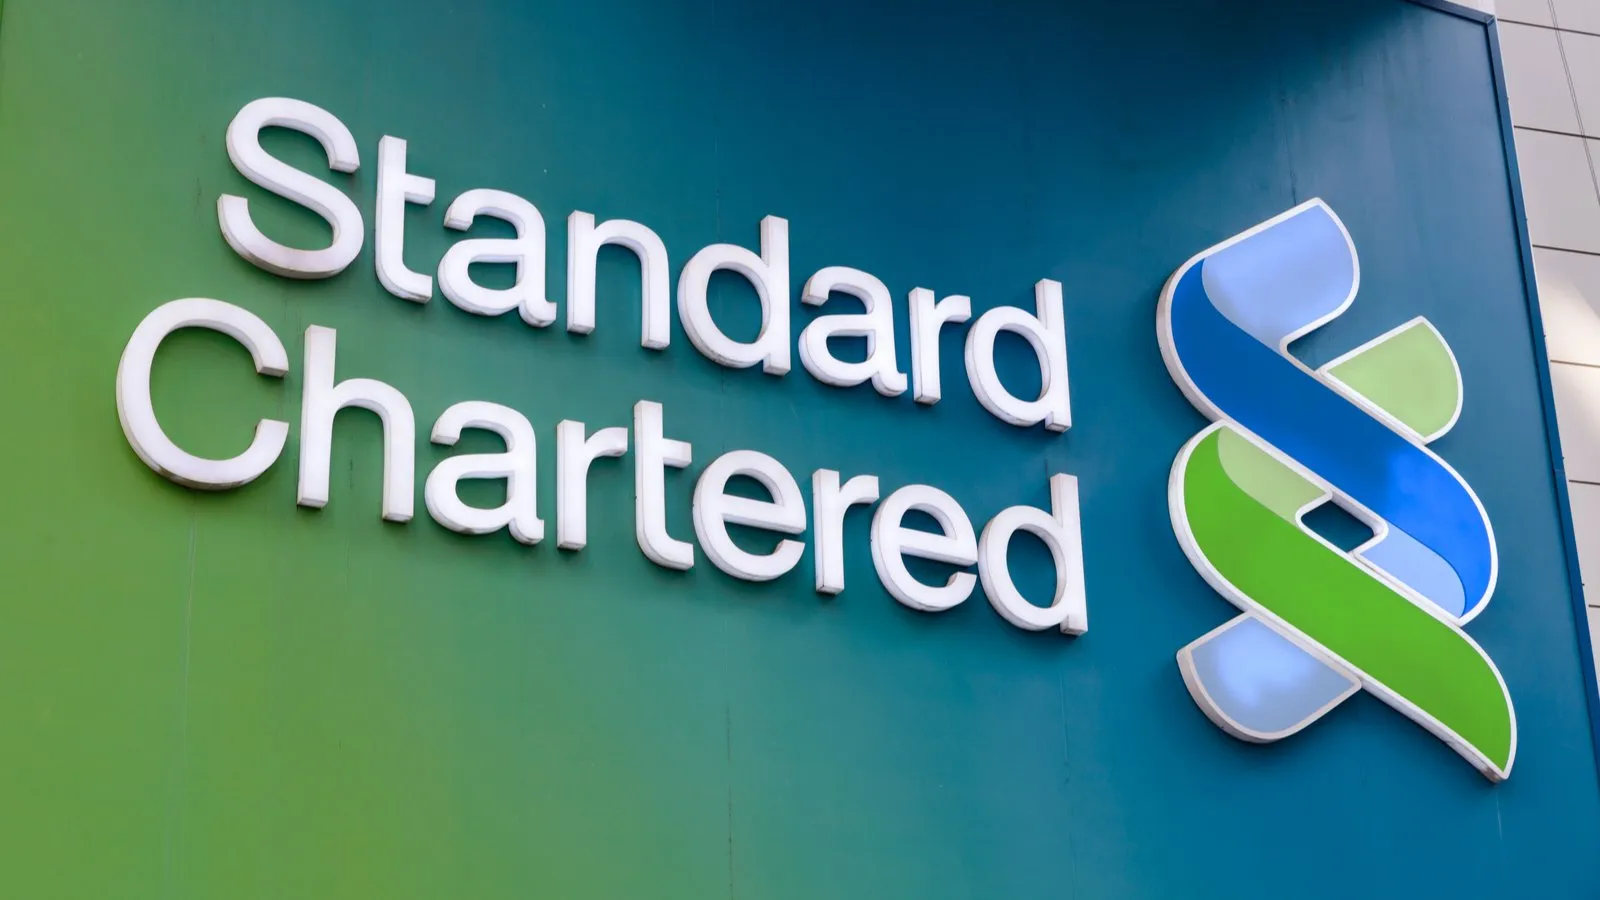 Despite having a base in the UK, the Standard Chartered does not offer retail banking services in Britain. Image: Shutterstock.